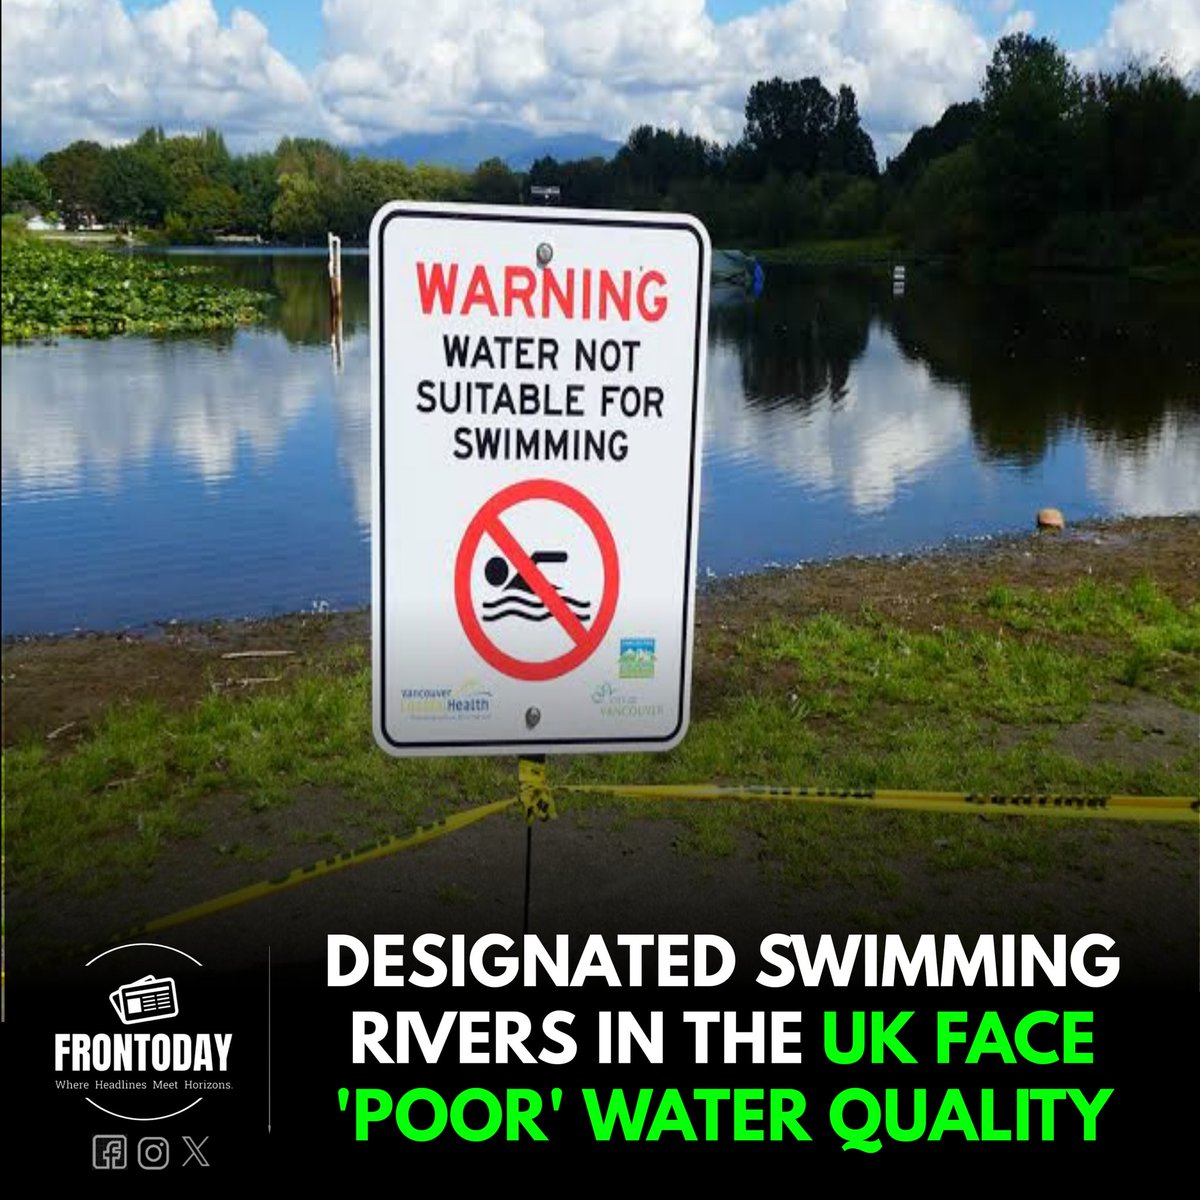 Concerns mount as designated swimming rivers in the UK receive a 'poor' water quality rating. Health risks underscore the urgent need for water quality improvements. #UKRivers #WaterQuality #HealthAlert